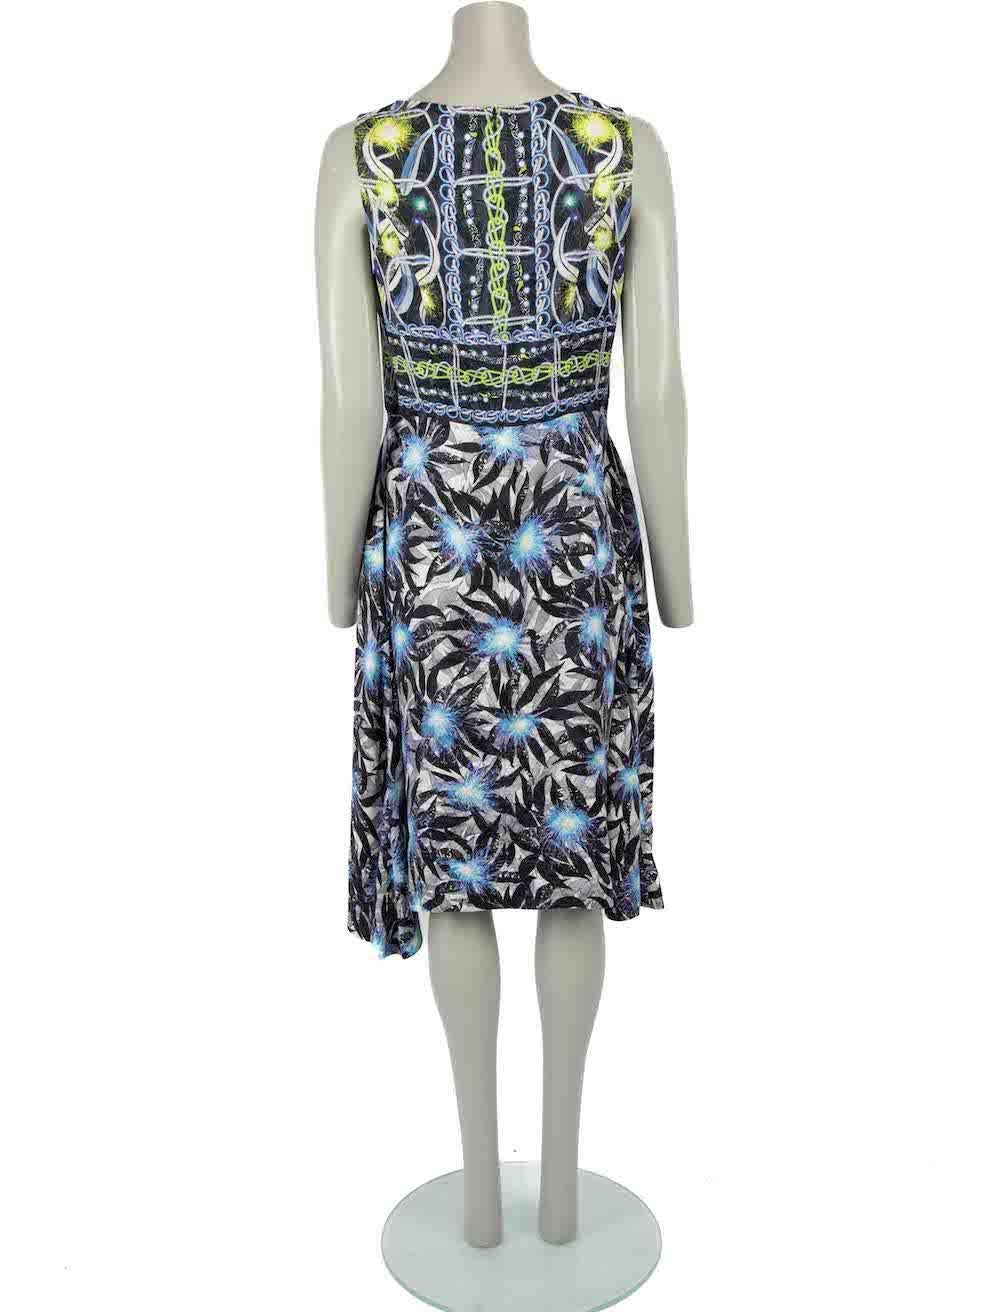 Peter Pilotto Abstract Print Sleeveless Midi Dress Size XXXL In Good Condition For Sale In London, GB